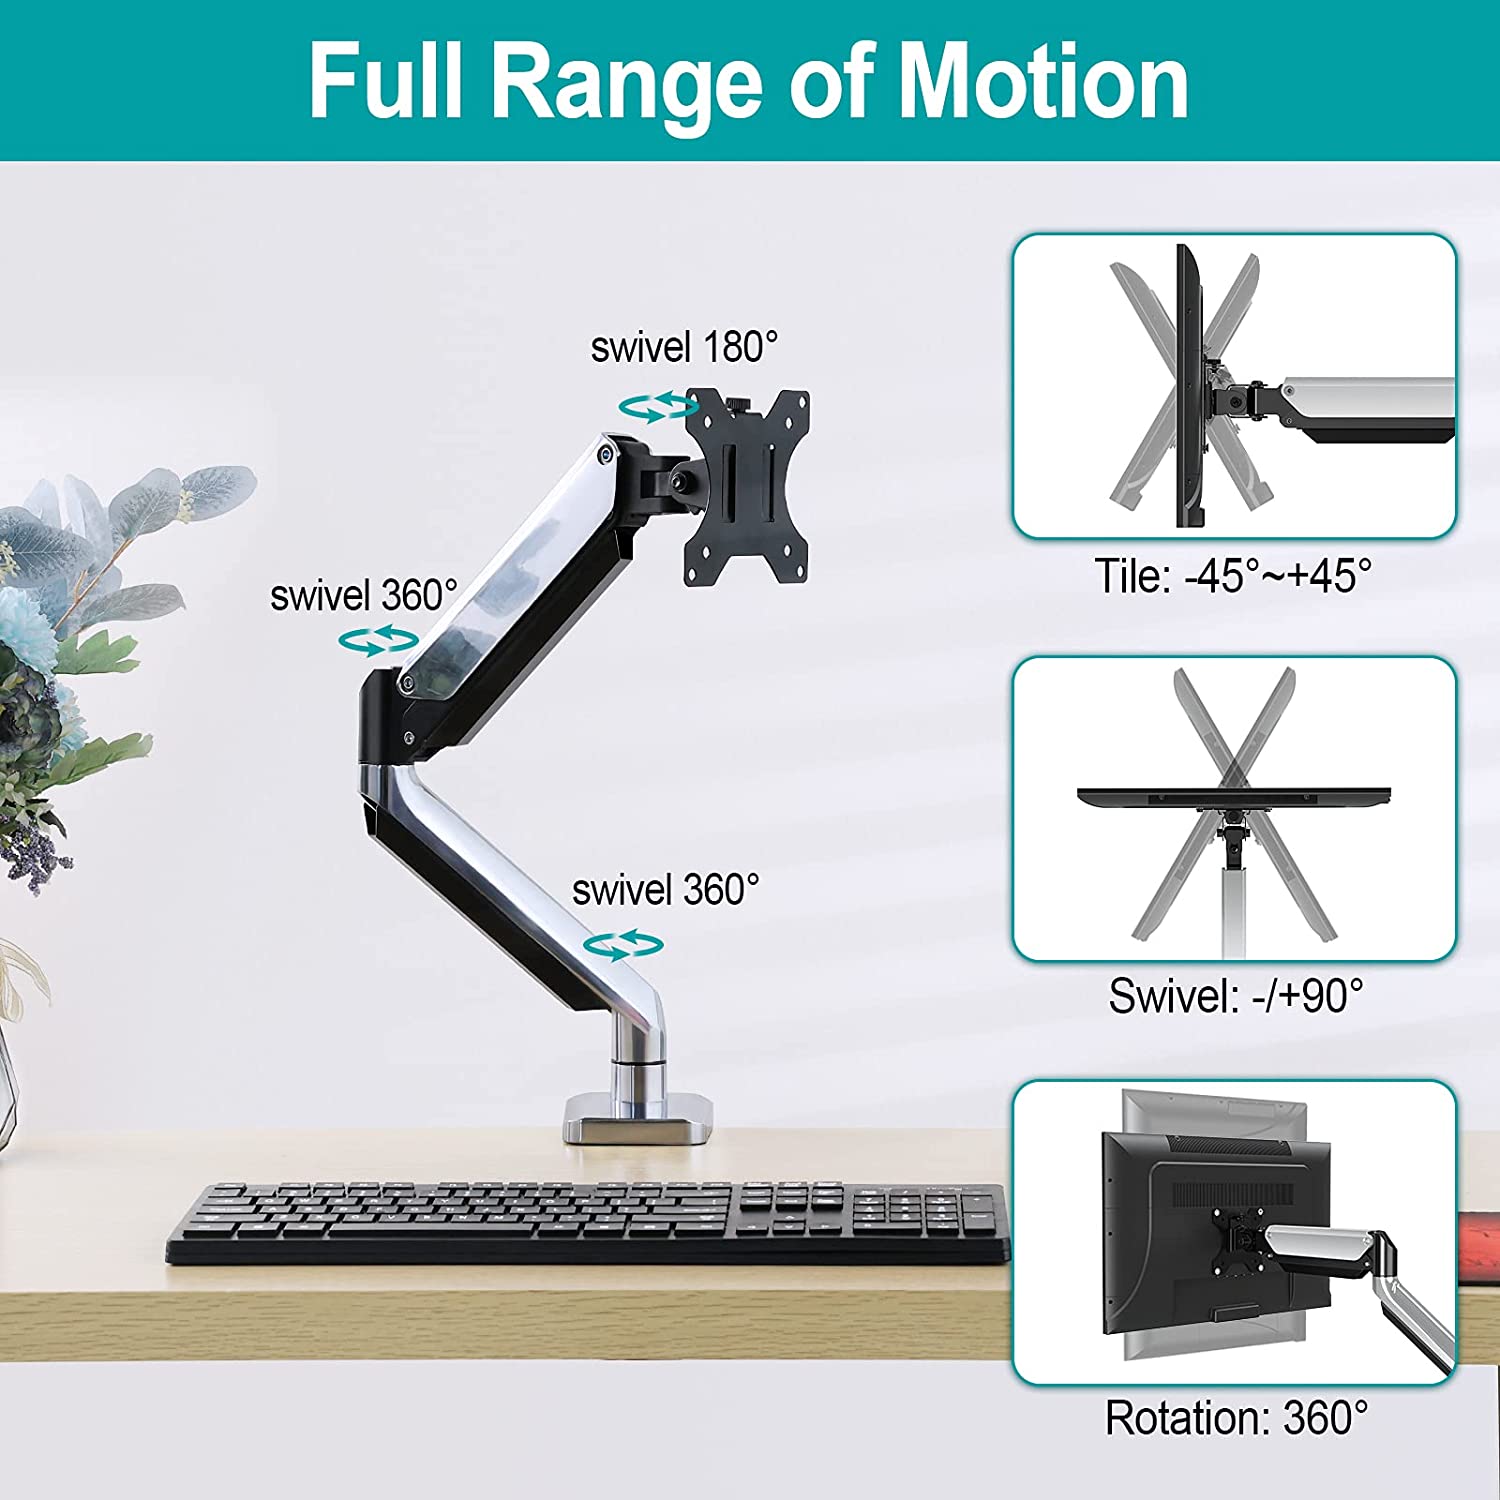 Single Arm full motion computer monitor mount for a better viewing angle